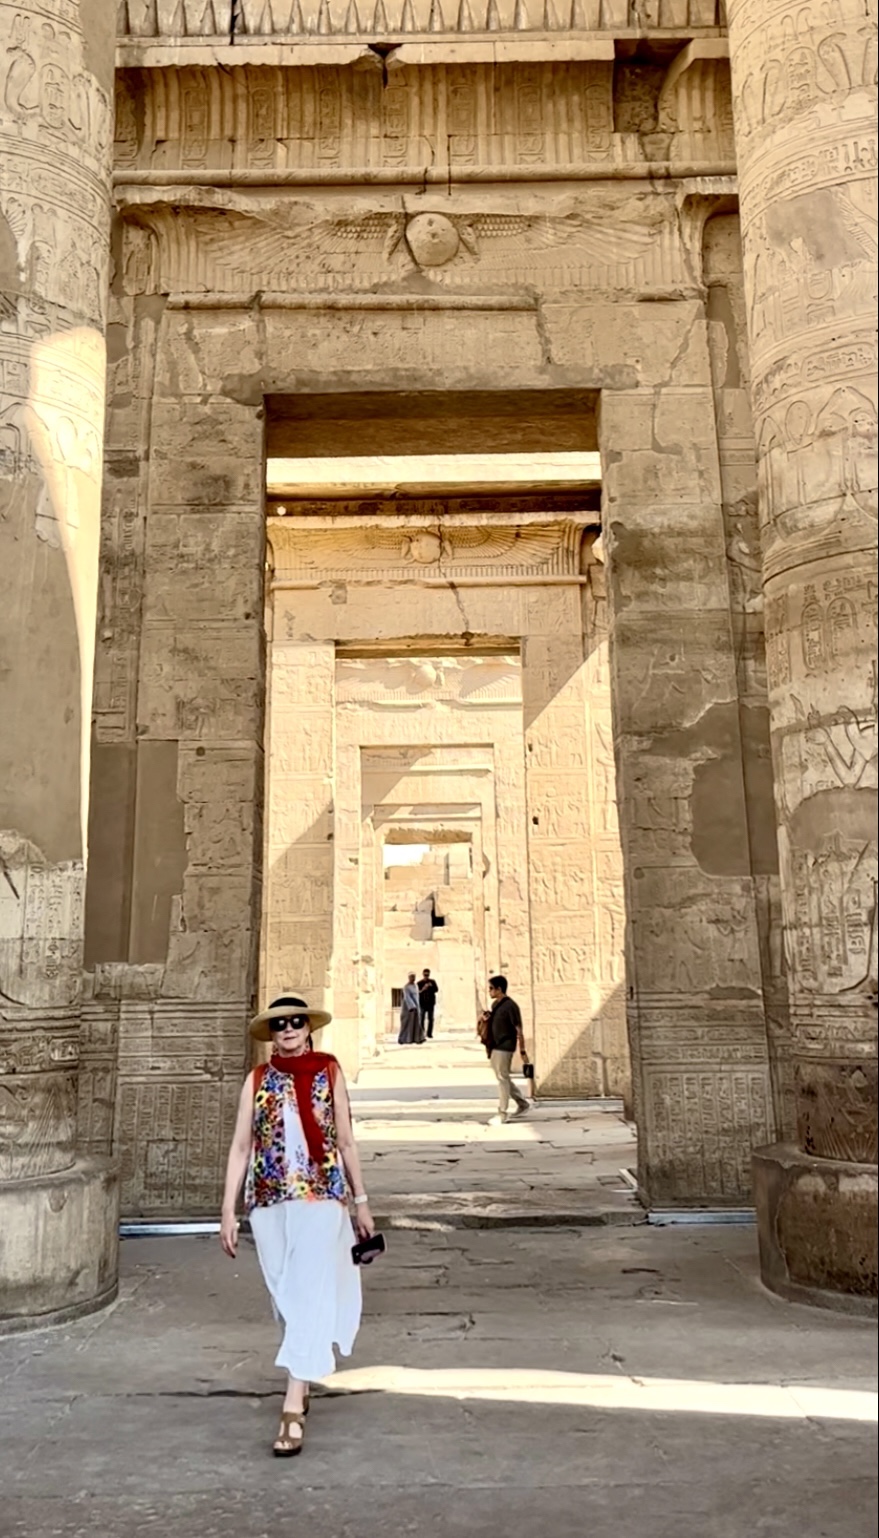 The Kom Ombo temple on a Nile River cruise